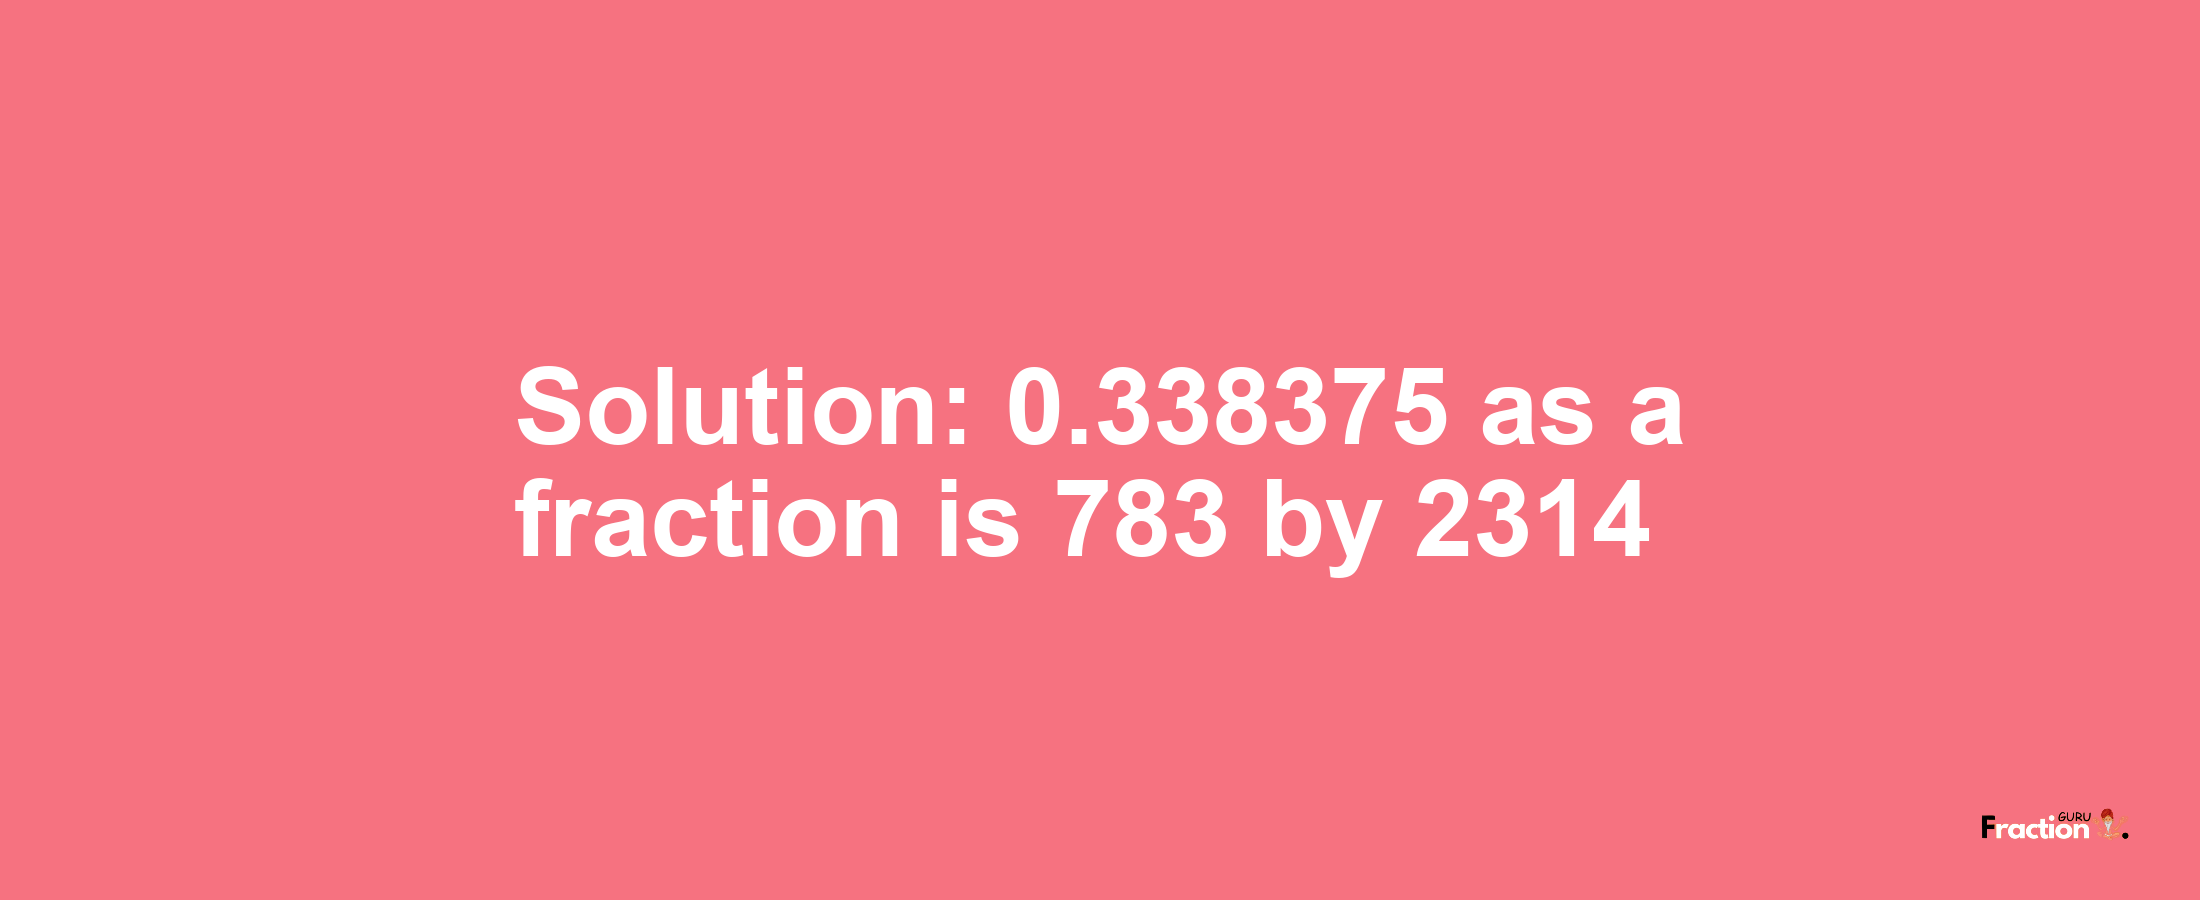 Solution:0.338375 as a fraction is 783/2314